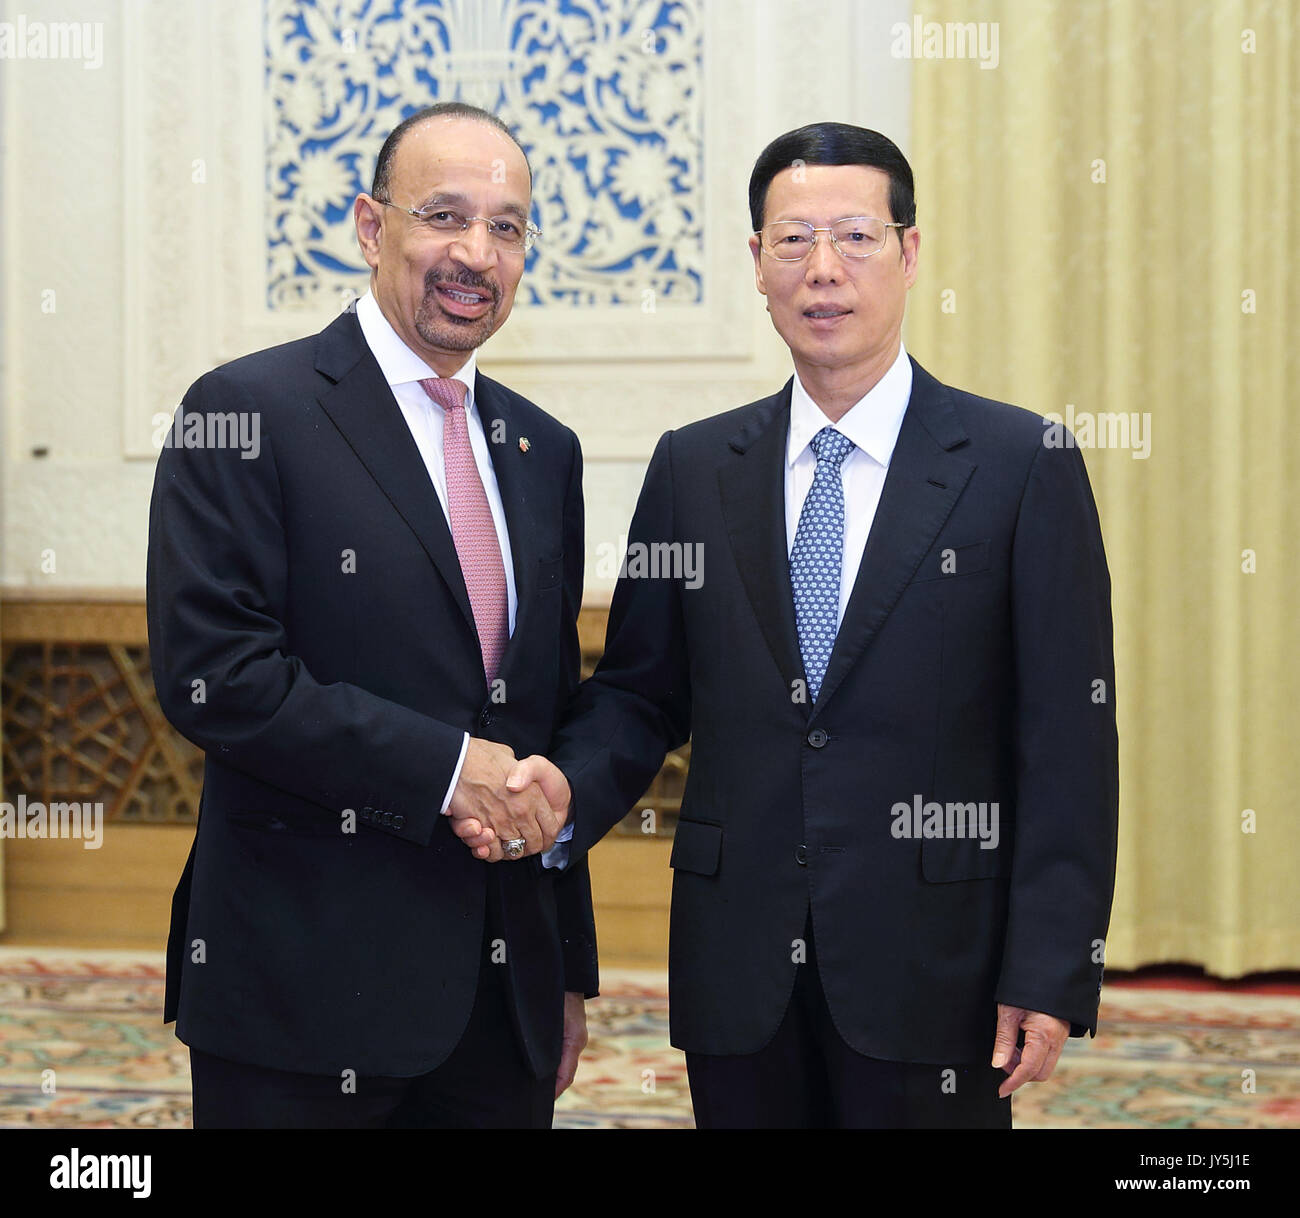 Beijing, China. 18th Aug, 2017. Chinese Vice Premier Zhang Gaoli (R) meets with Saudi Arabian Minister of Energy, Industry and Mineral Resources Khalid al-Falih in Beijing, capital of China, Aug. 18, 2017. Credit: Wang Ye/Xinhua/Alamy Live News Stock Photo